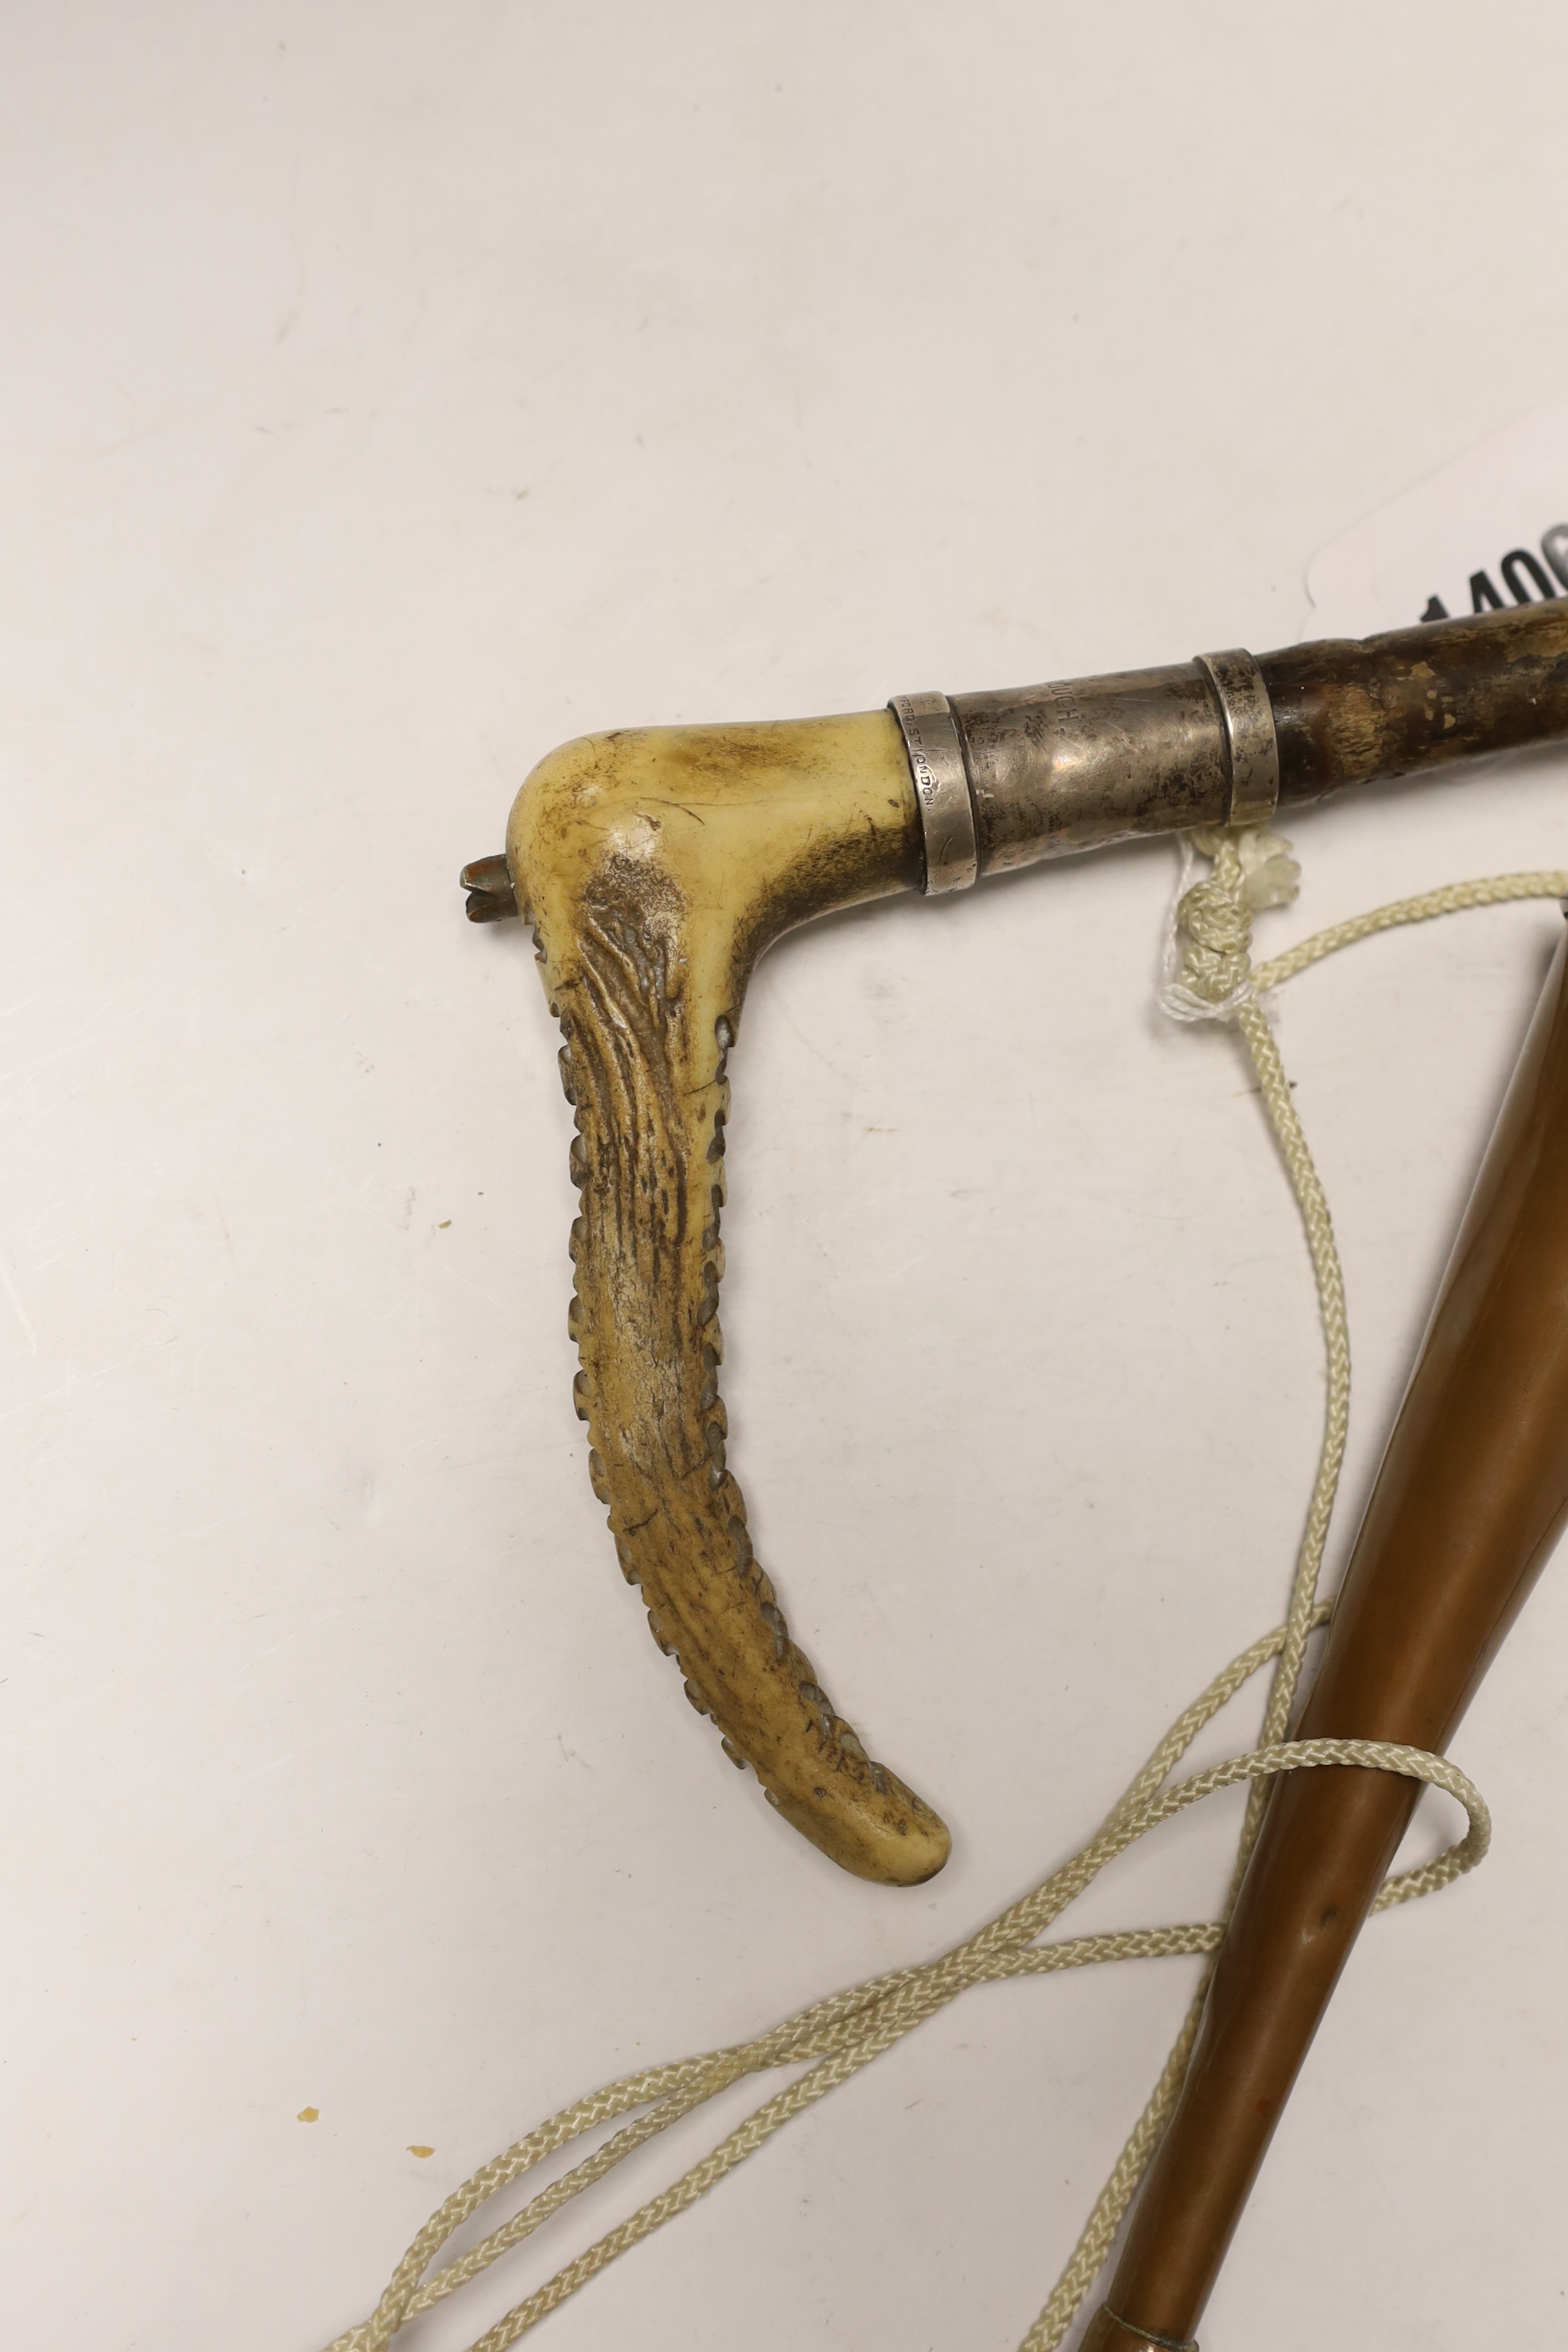 A silver mounted riding crop, a hunting horn and a horn whistle